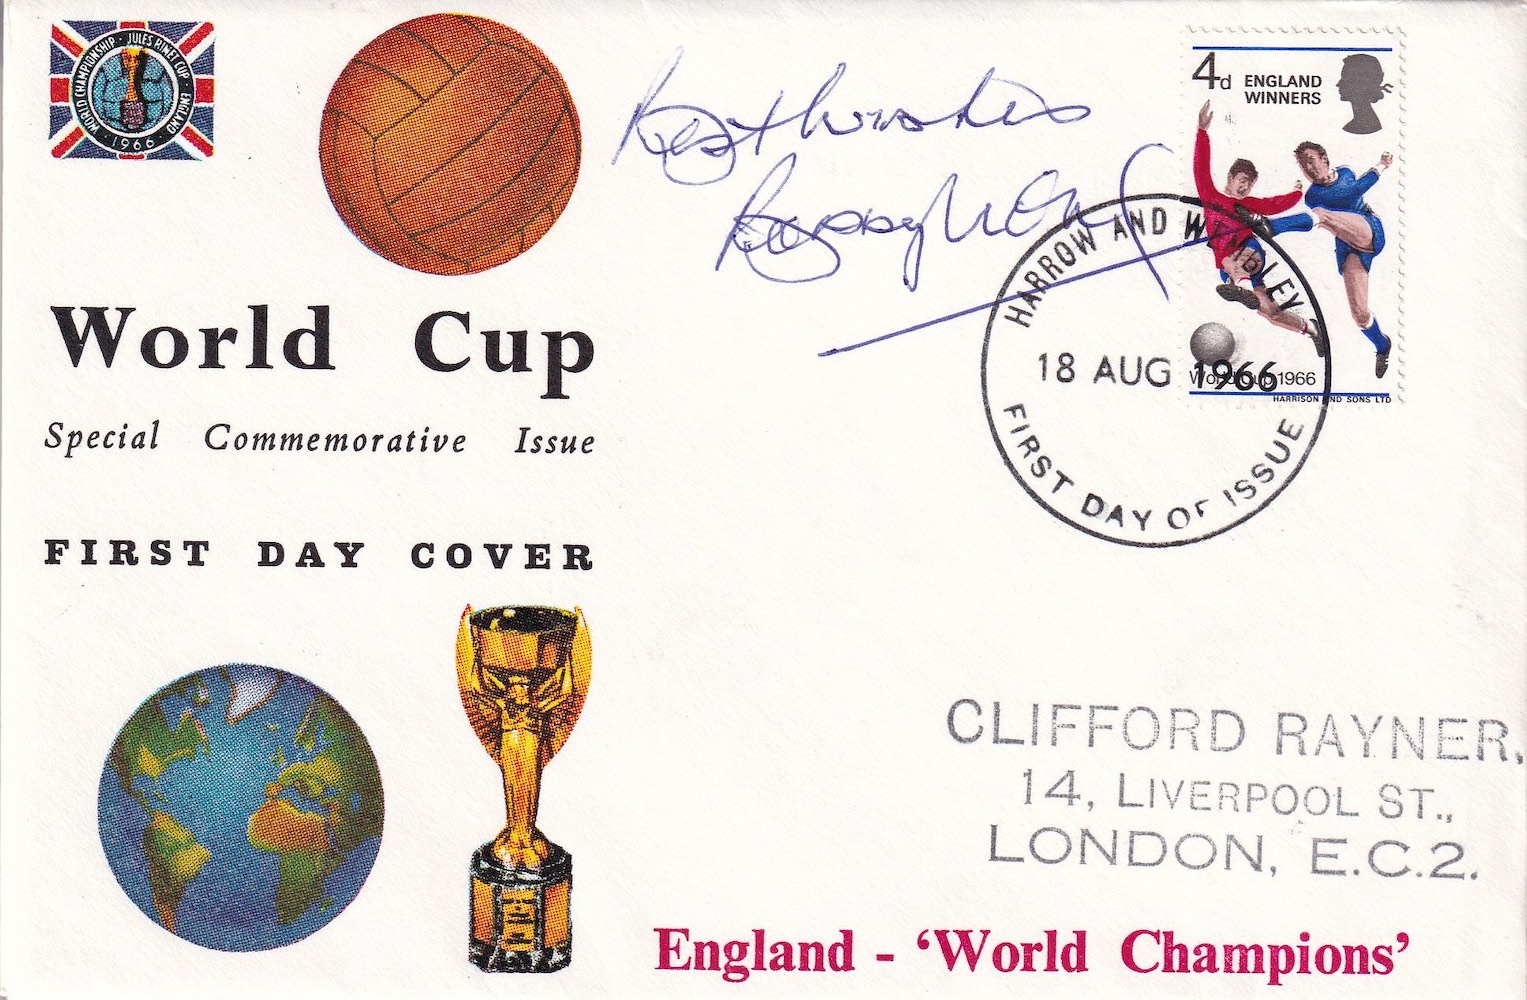 Bobby Moore 1966 World Cup Winning Captain Signed FDC. Good Condition. All autographs come with a